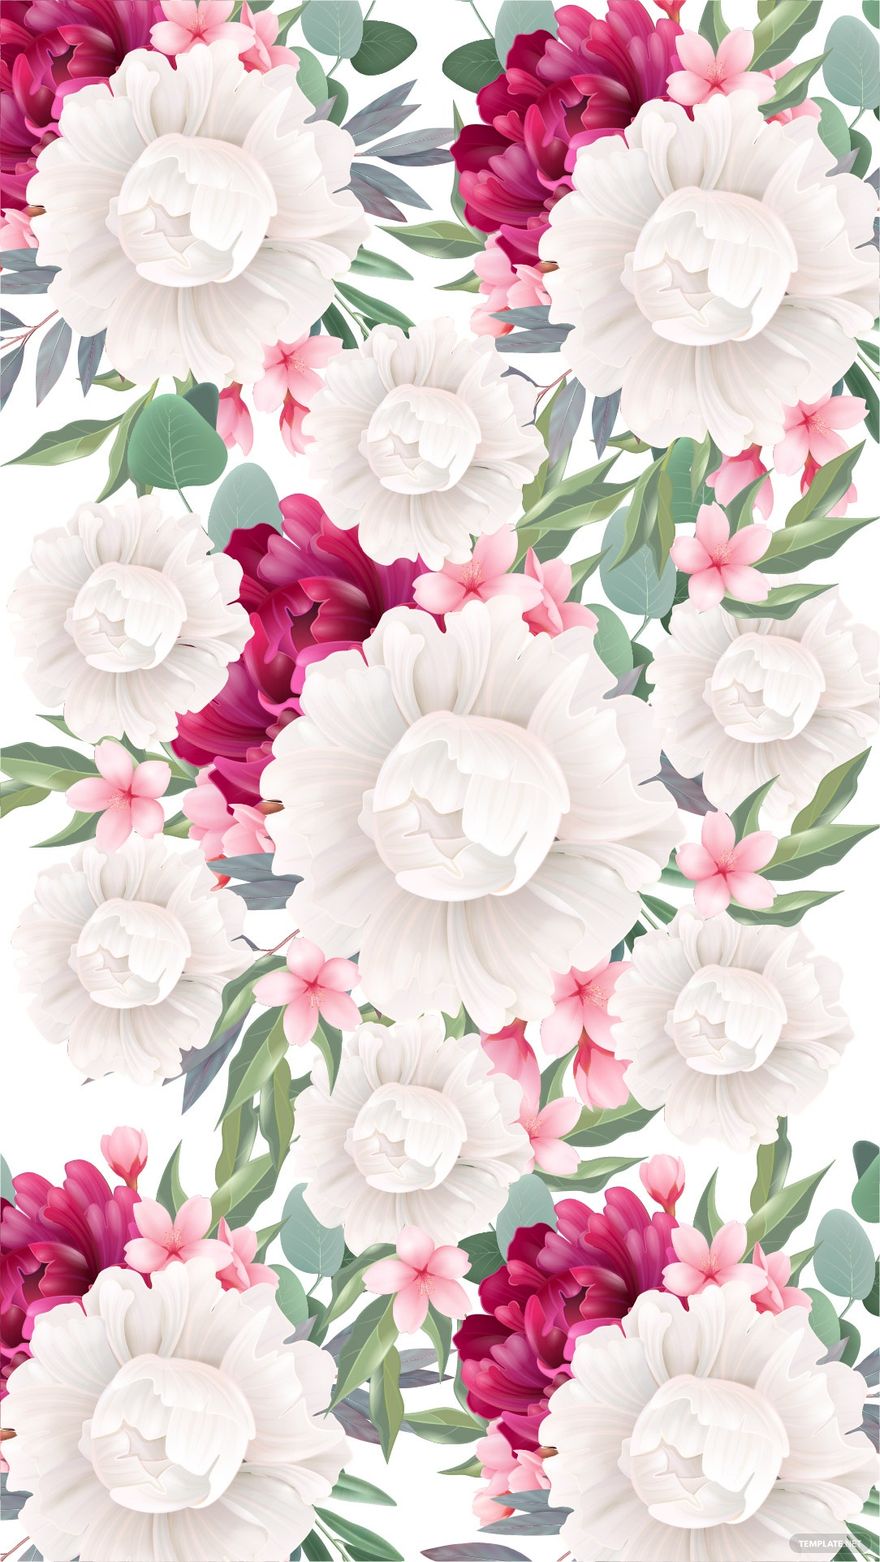 Wedding Background - Images, HD, Free, Download 